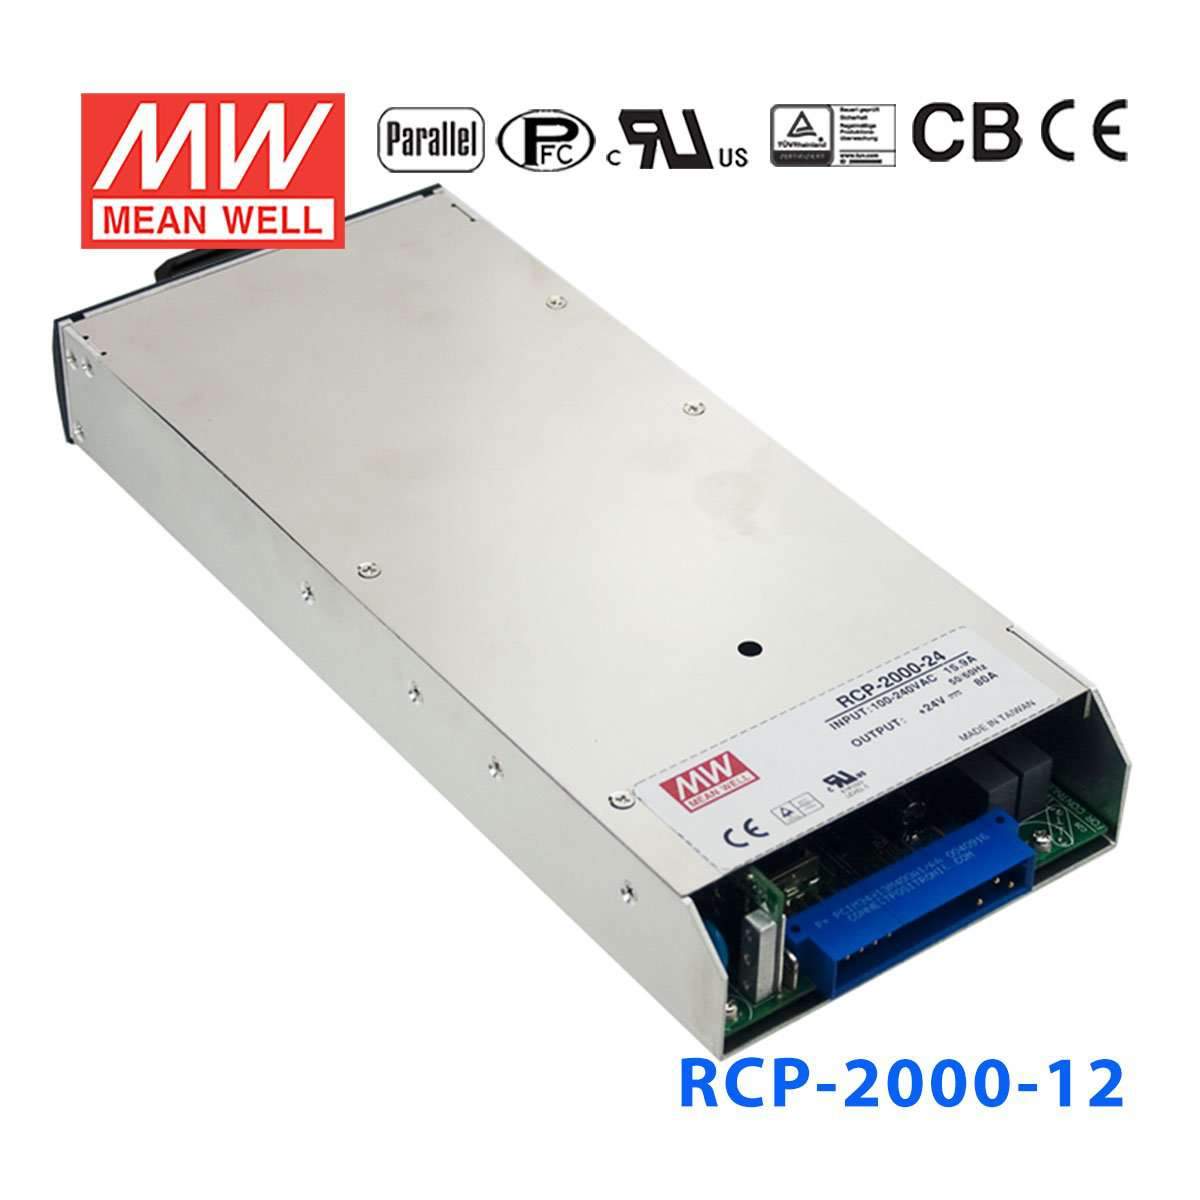 Mean Well RCP-2000-12 power supply 2000W 12V 100A